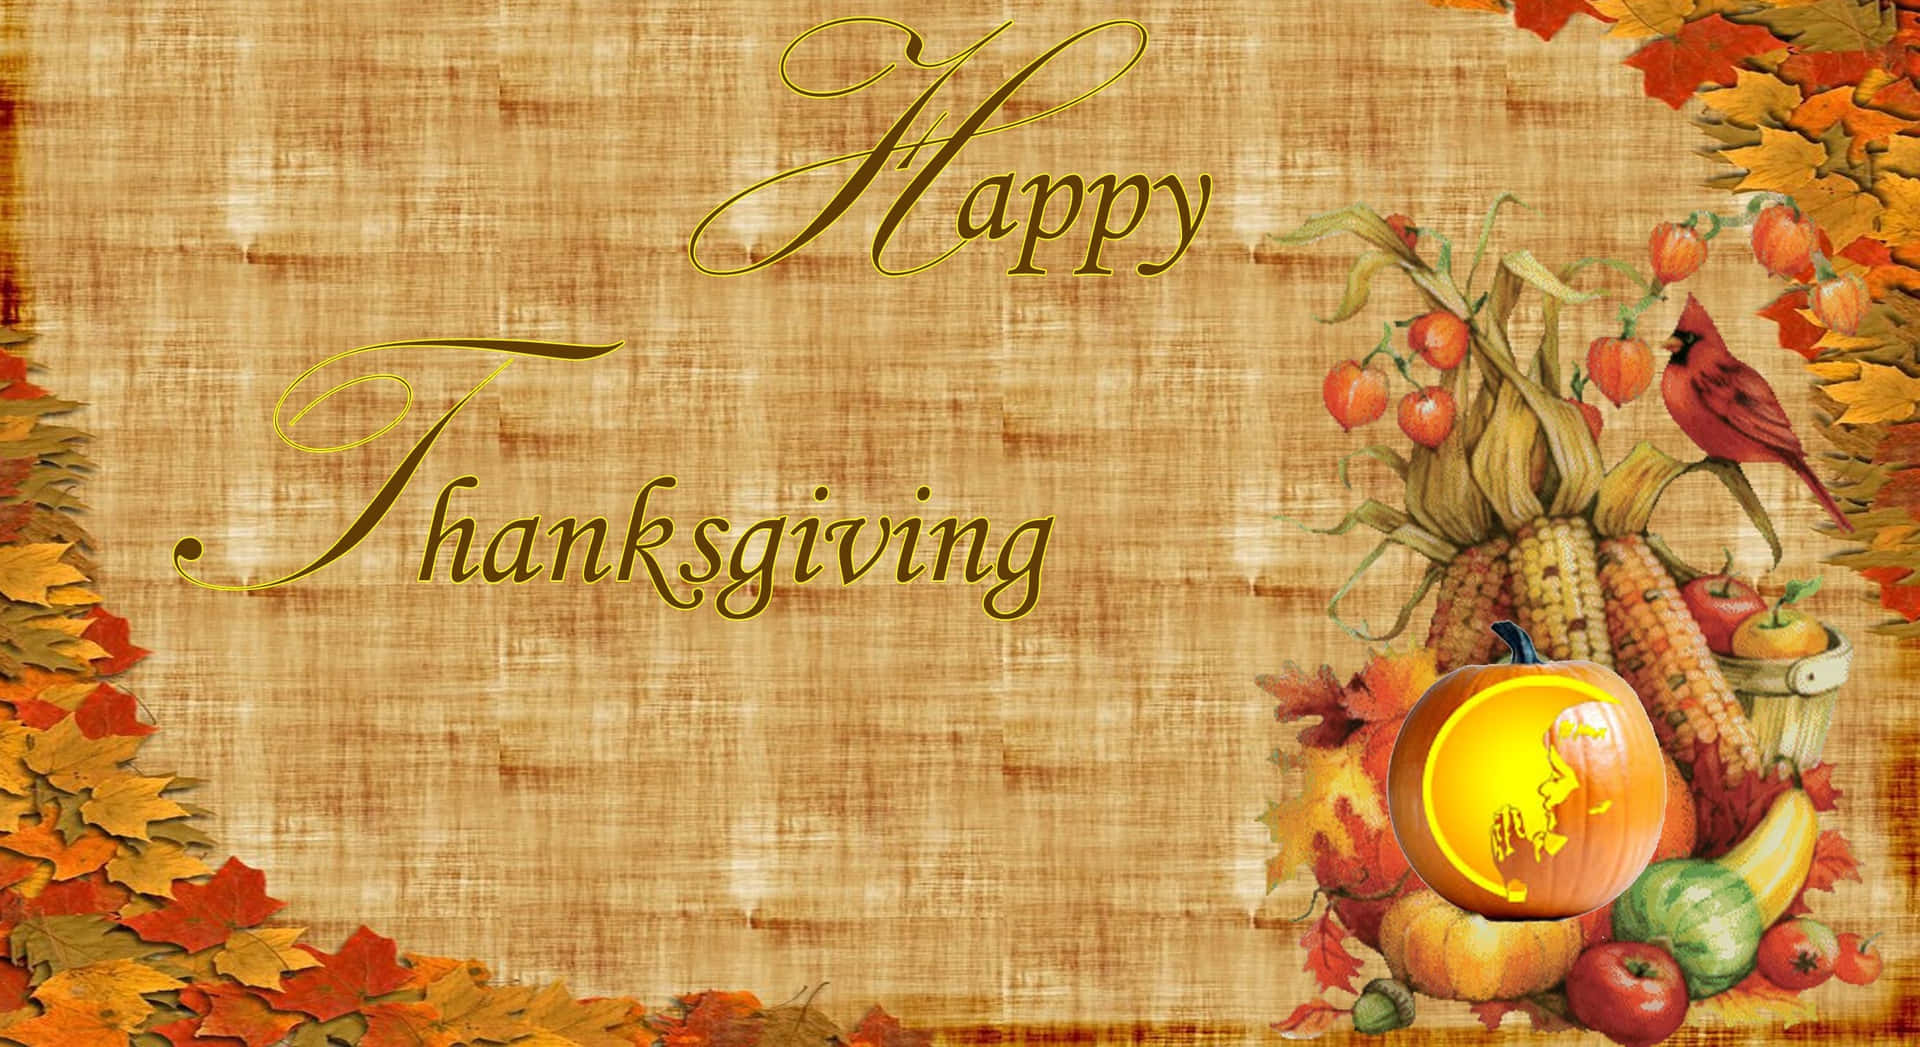 Happy Thanksgiving Greeting On Brown Parchment Background